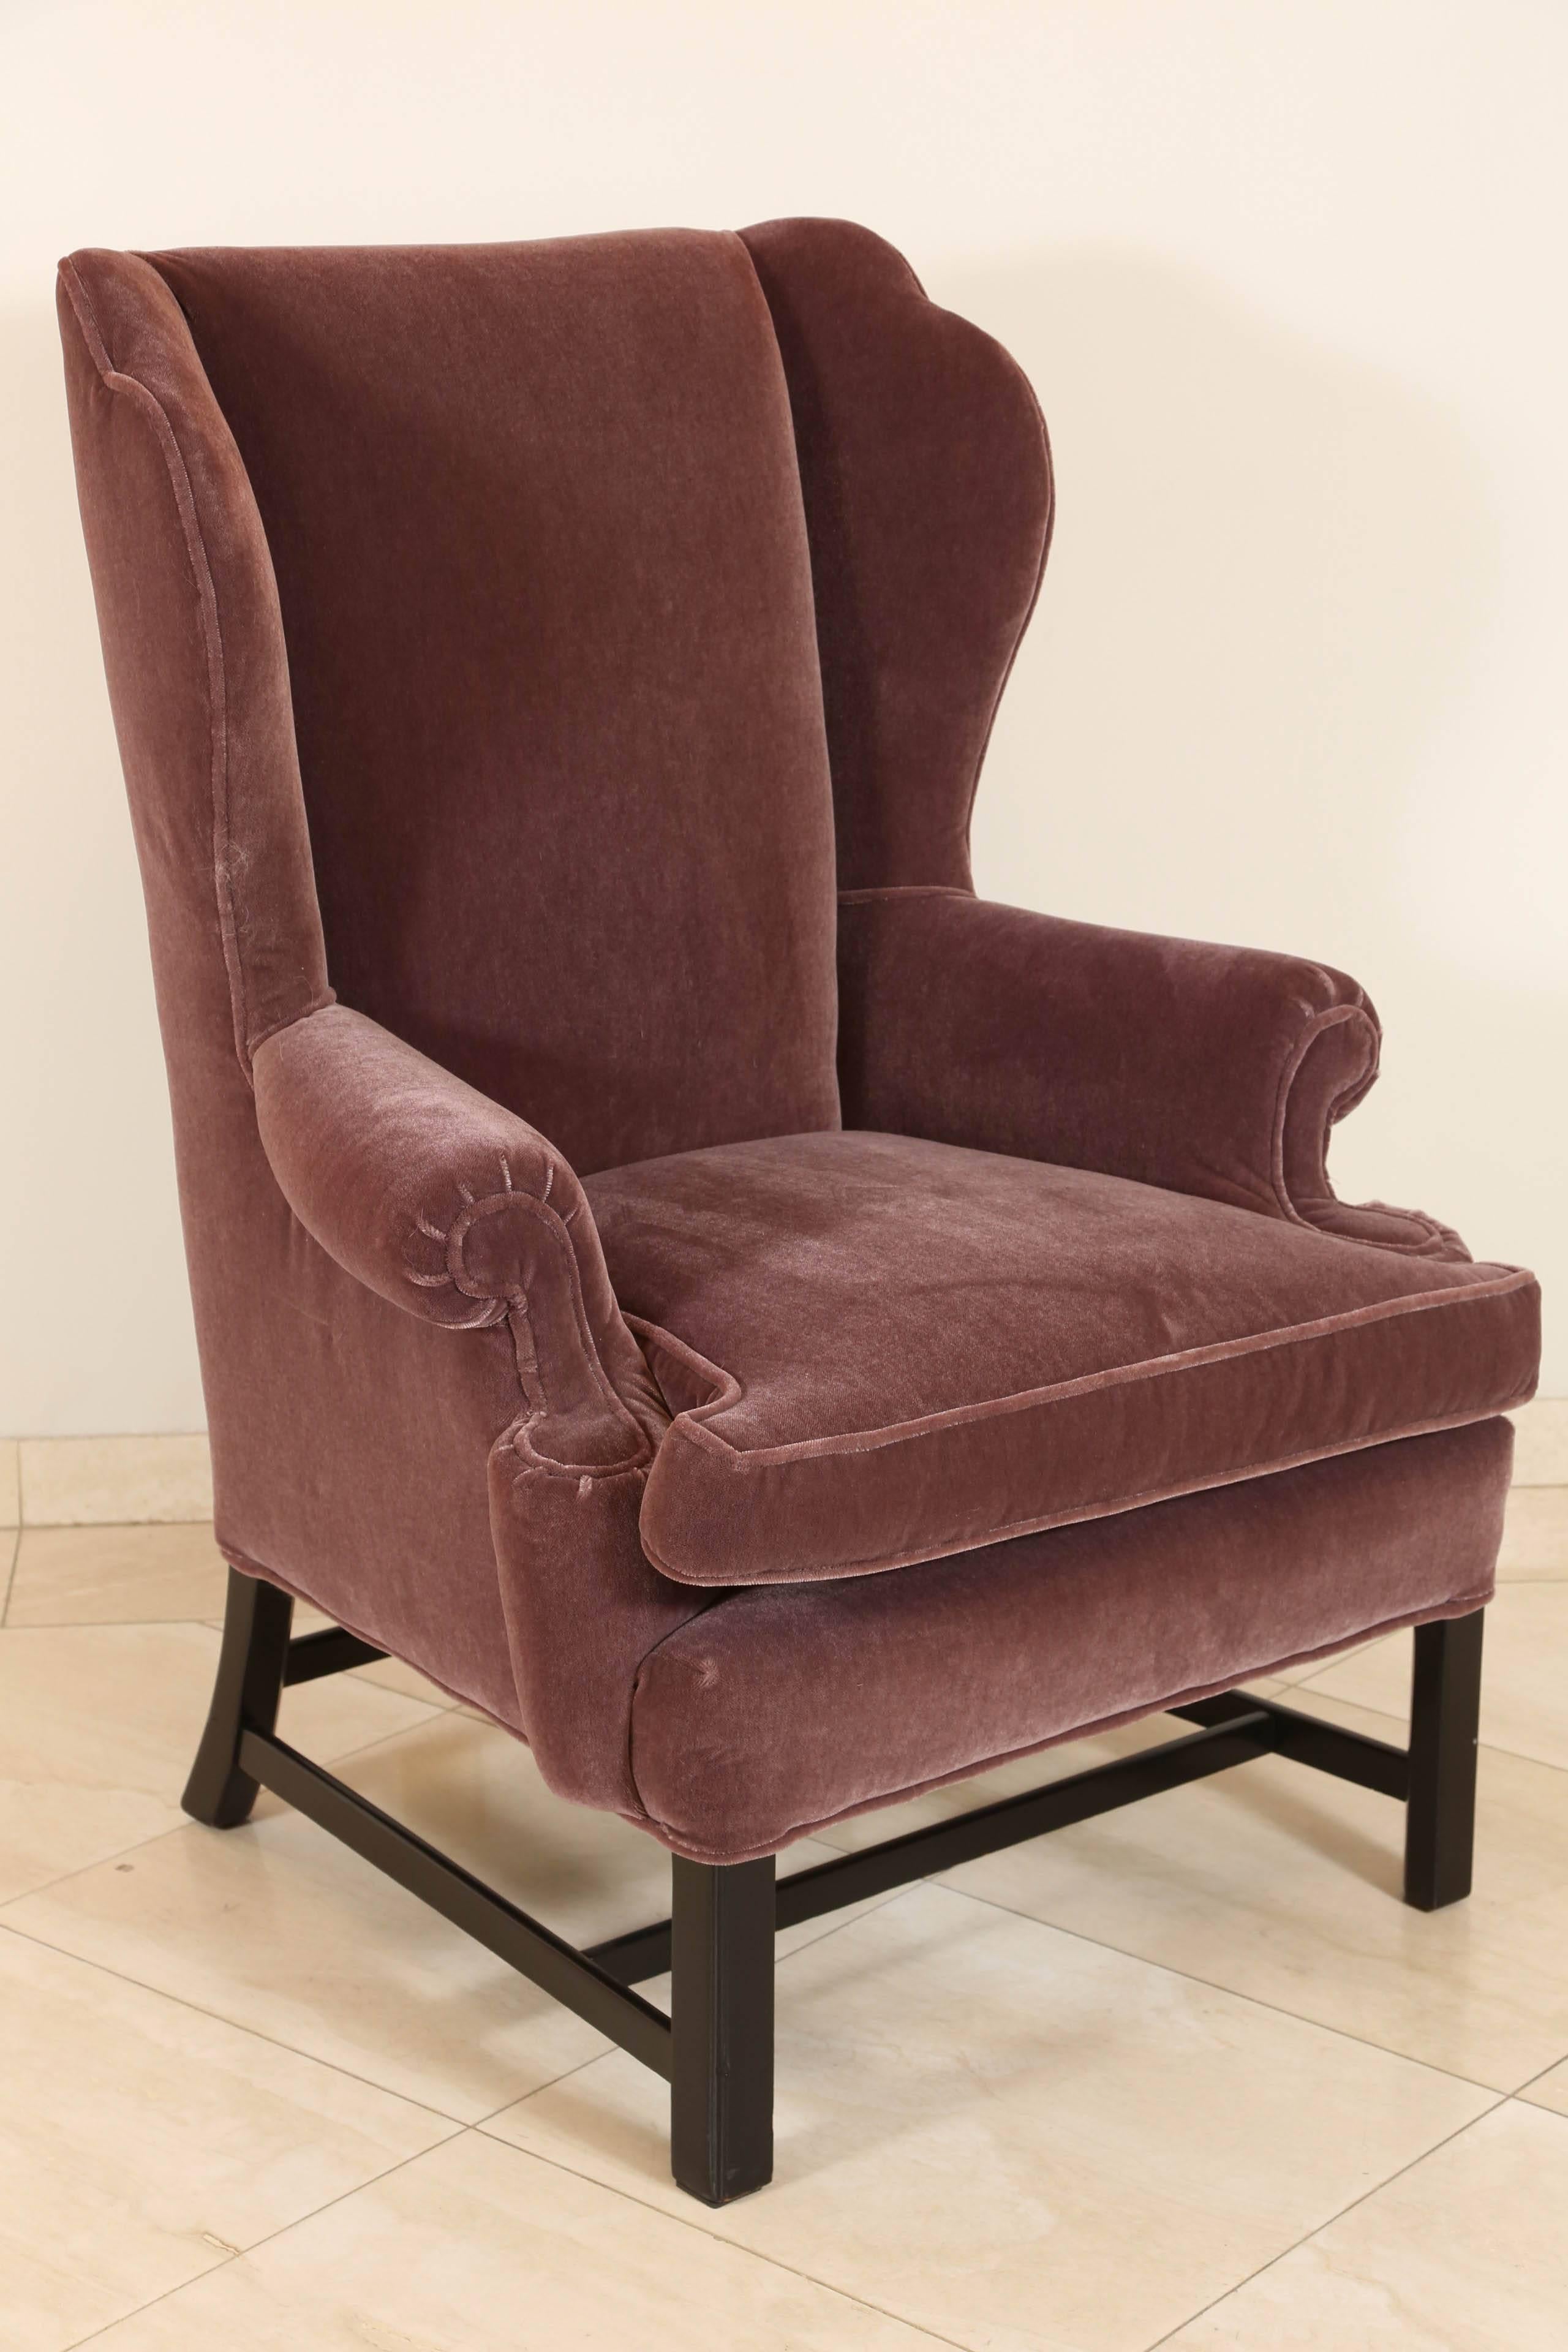 Hollywood Regency French Style Mohair Club Chair, Plum Color